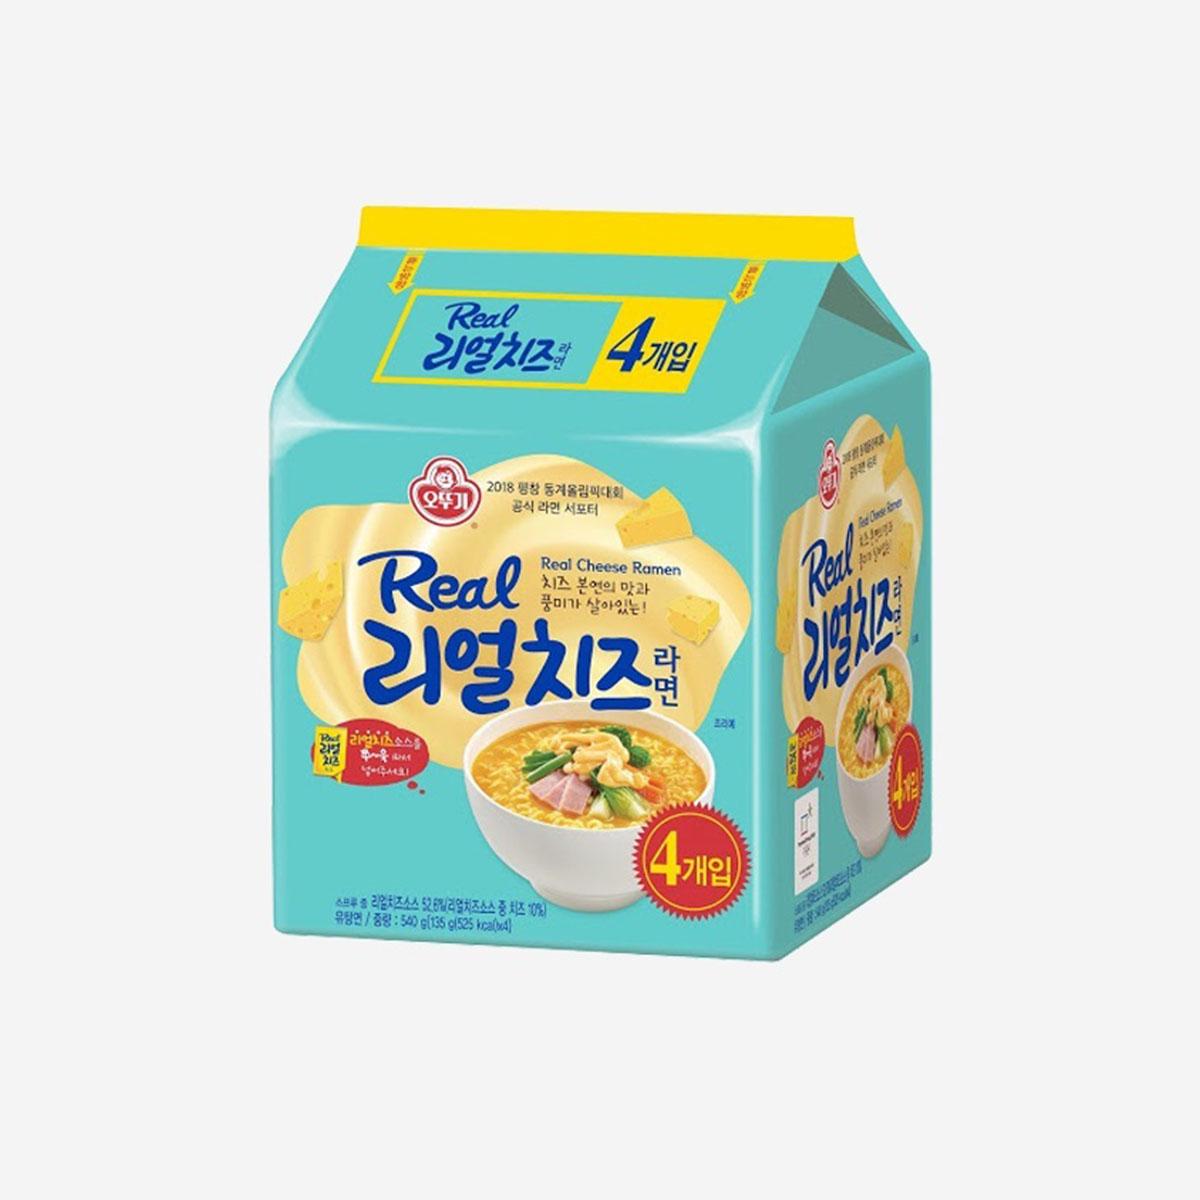 Real Cheese Ramen (Pack of 4)